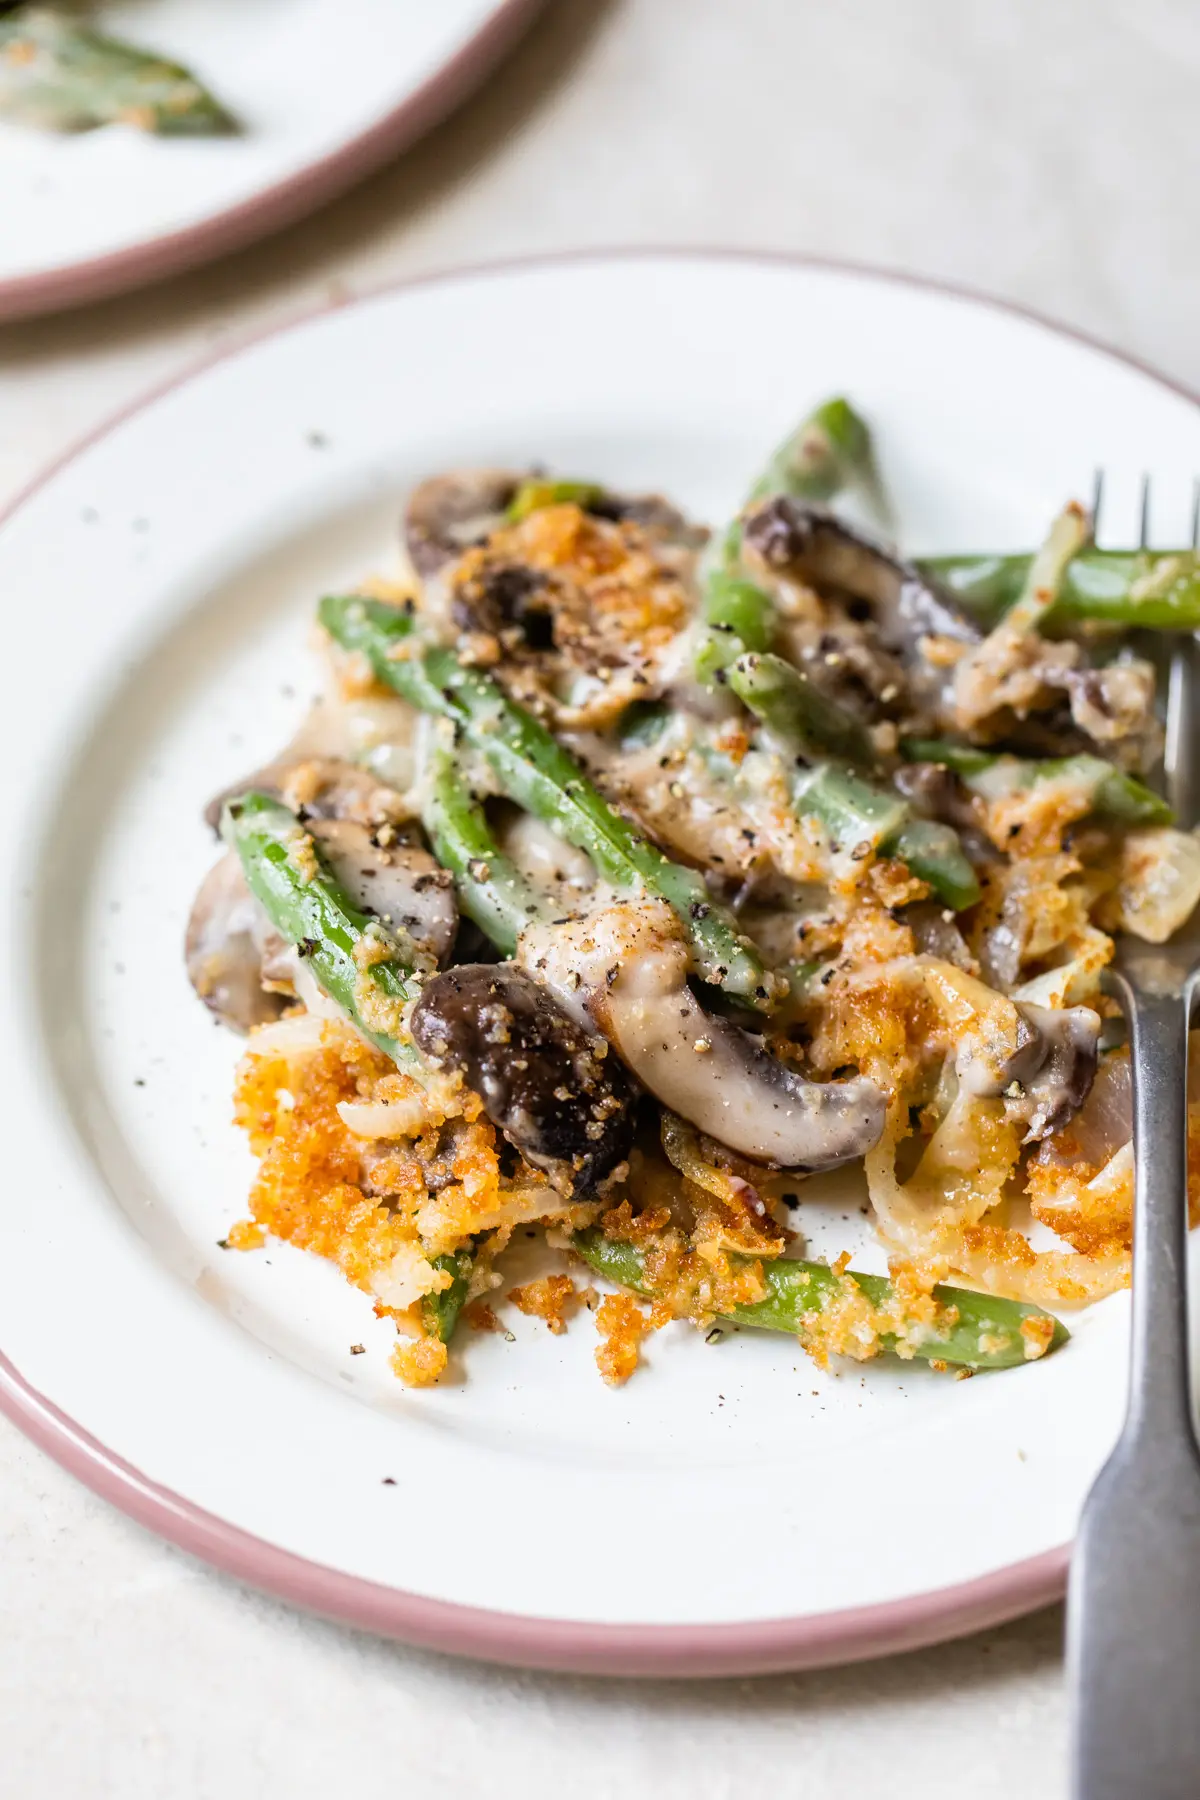 green beans, mushrooms and crispy onions on a plate with a fork